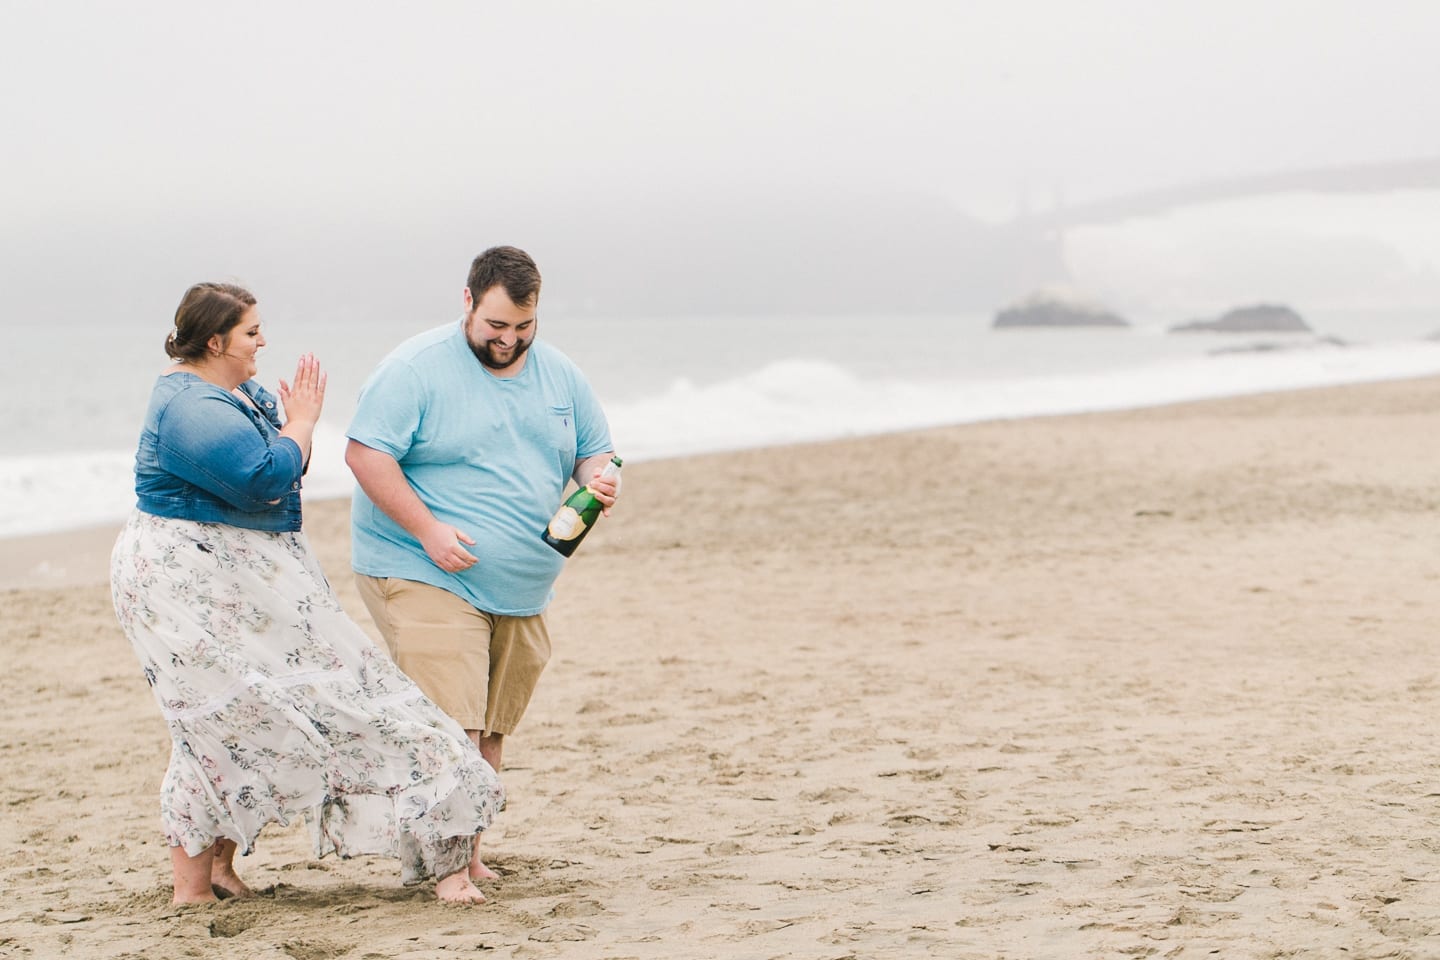 palace_of_fine_arts_bakers_beach_engagement_022.jpg